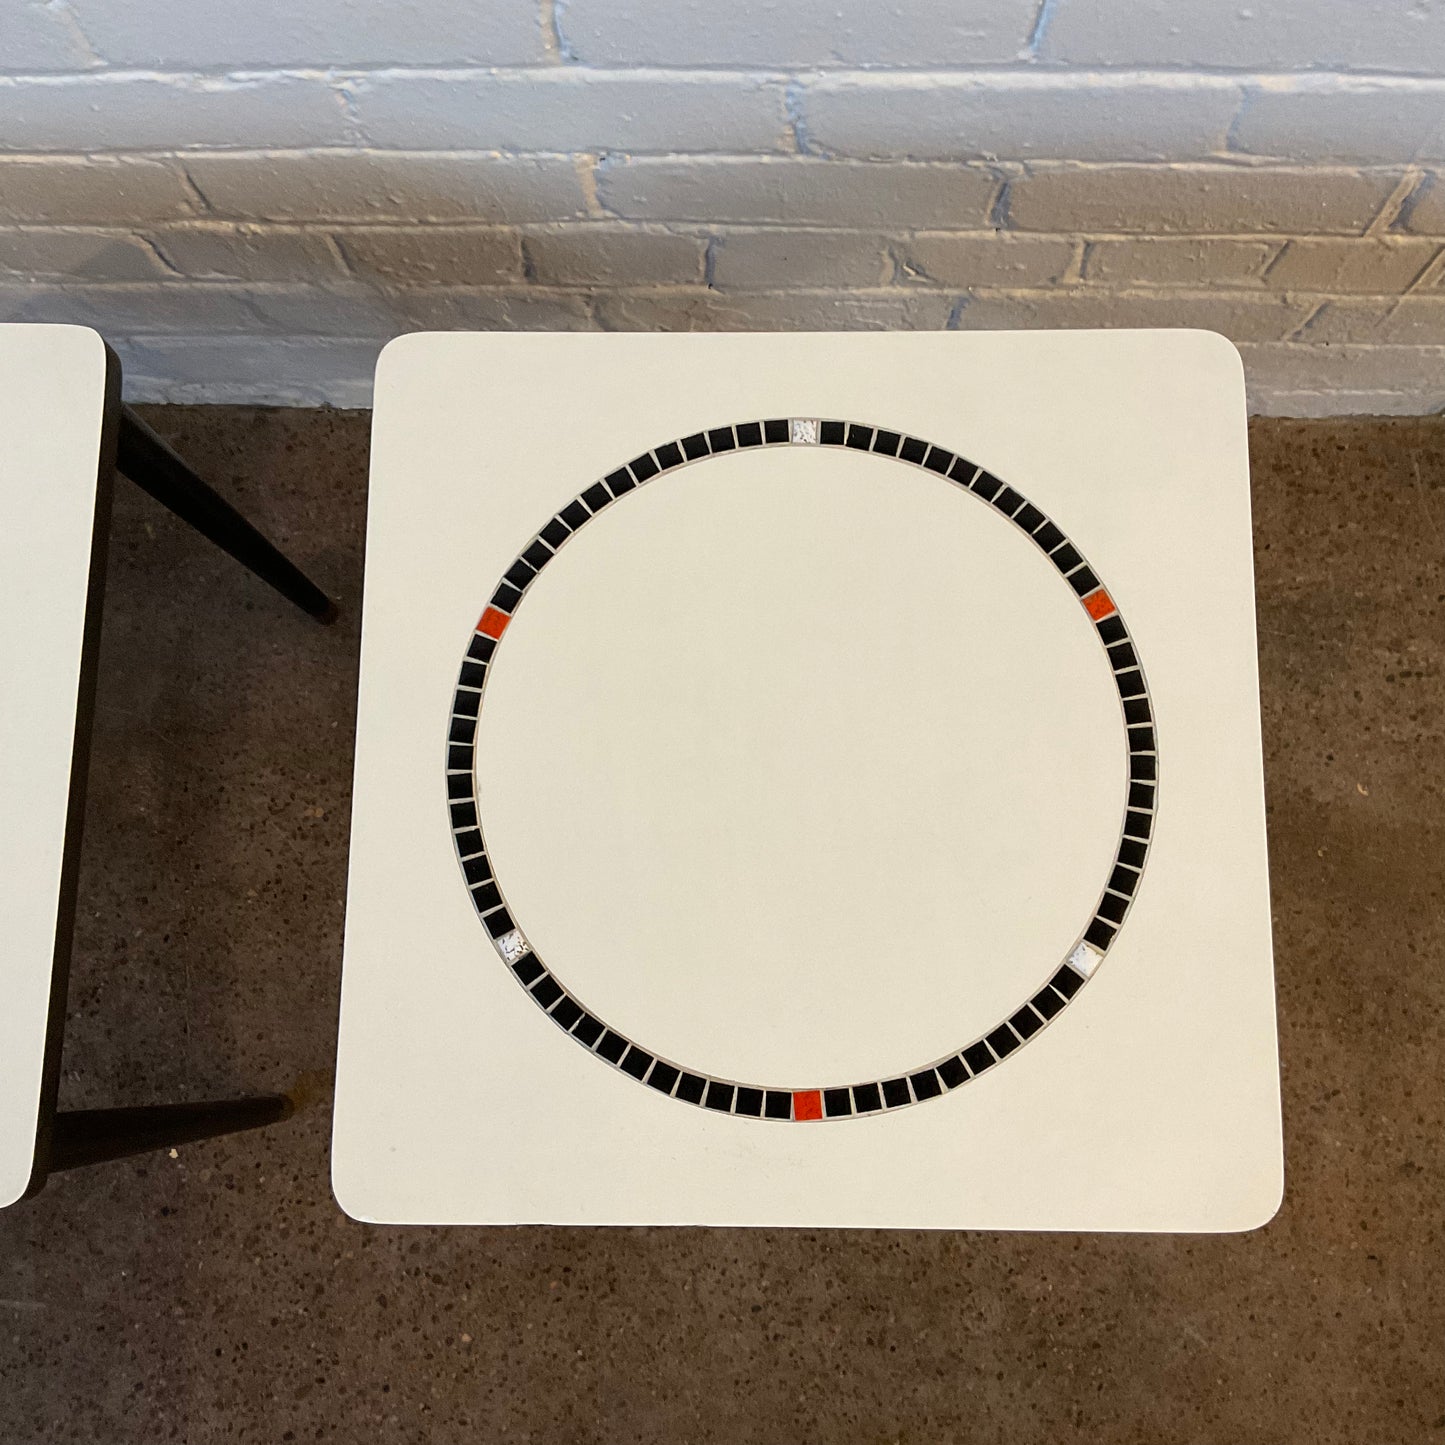 WHITE AND TILE SMALL TABLE SET